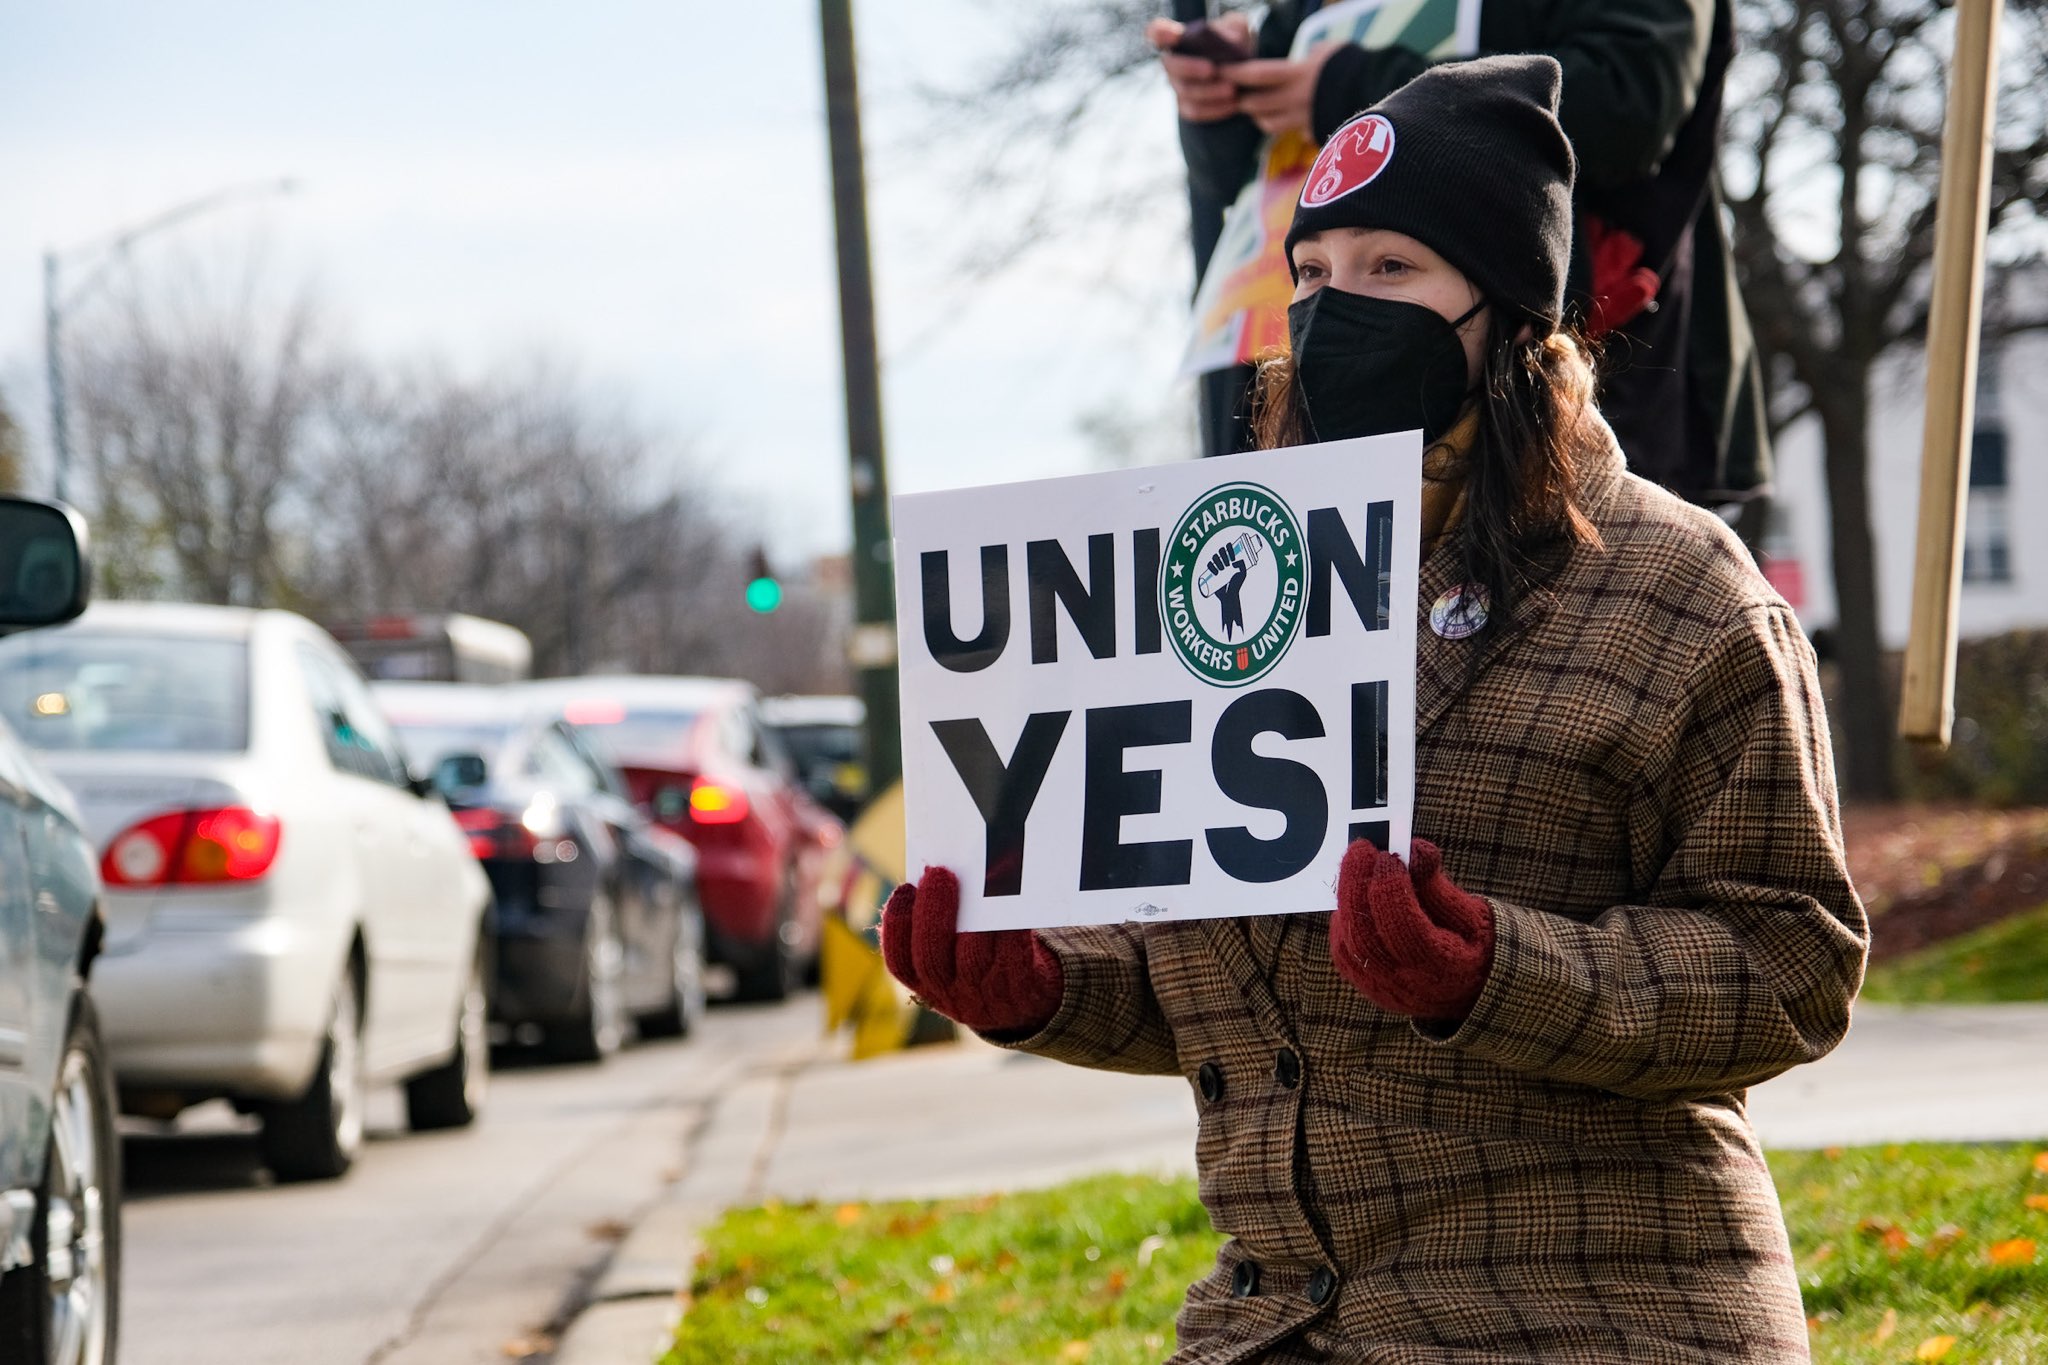 A person in heavy winter wear holds a sign reading Union Yes! in front of a line of cars.